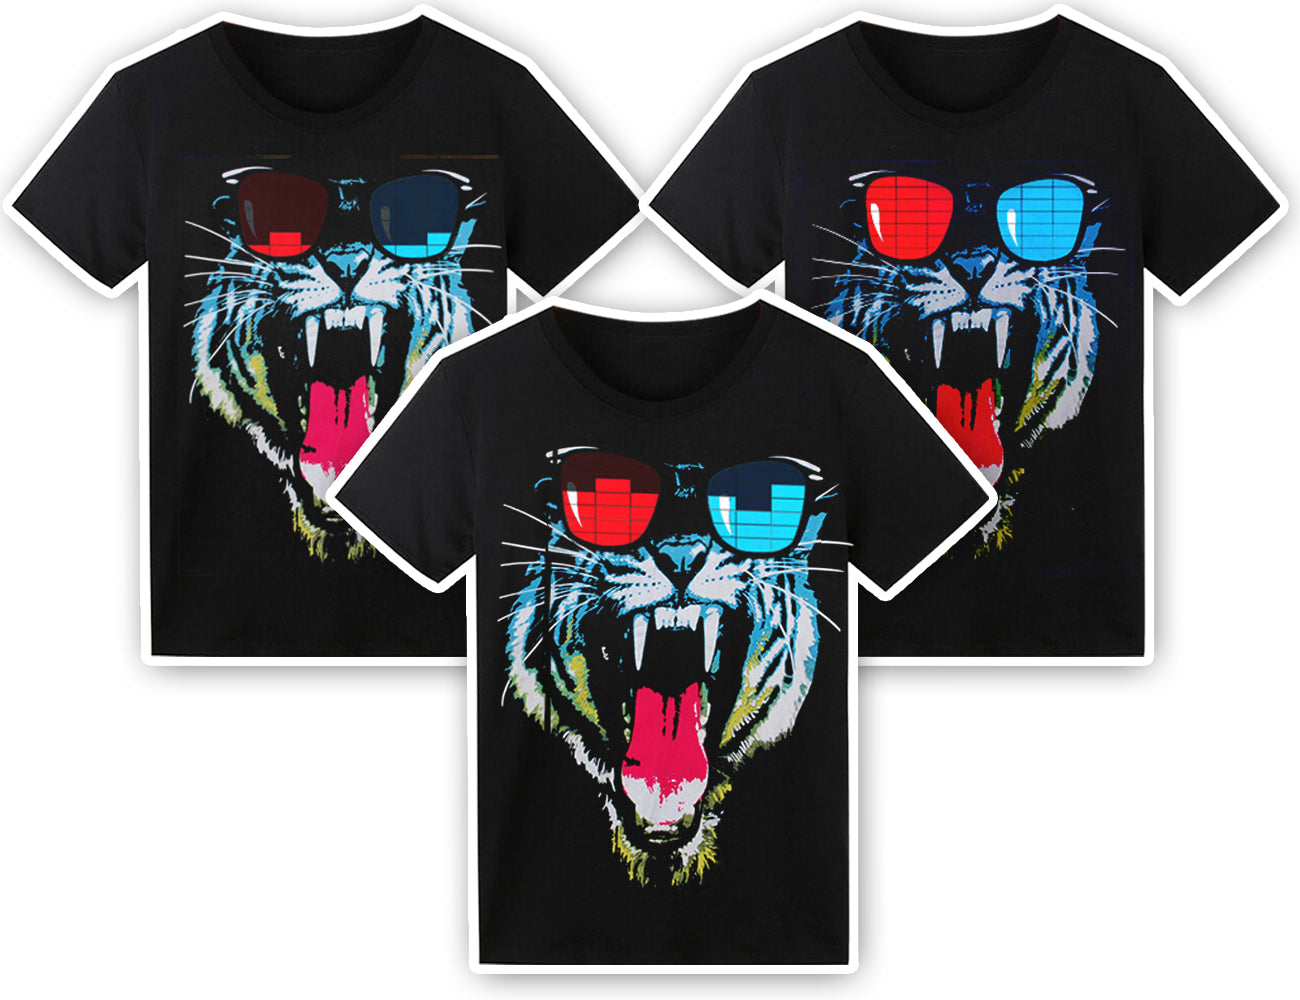 LED T Shirt Sound Activated Glow Shirts Light up Equalizer Clothes for Party(Tiger)